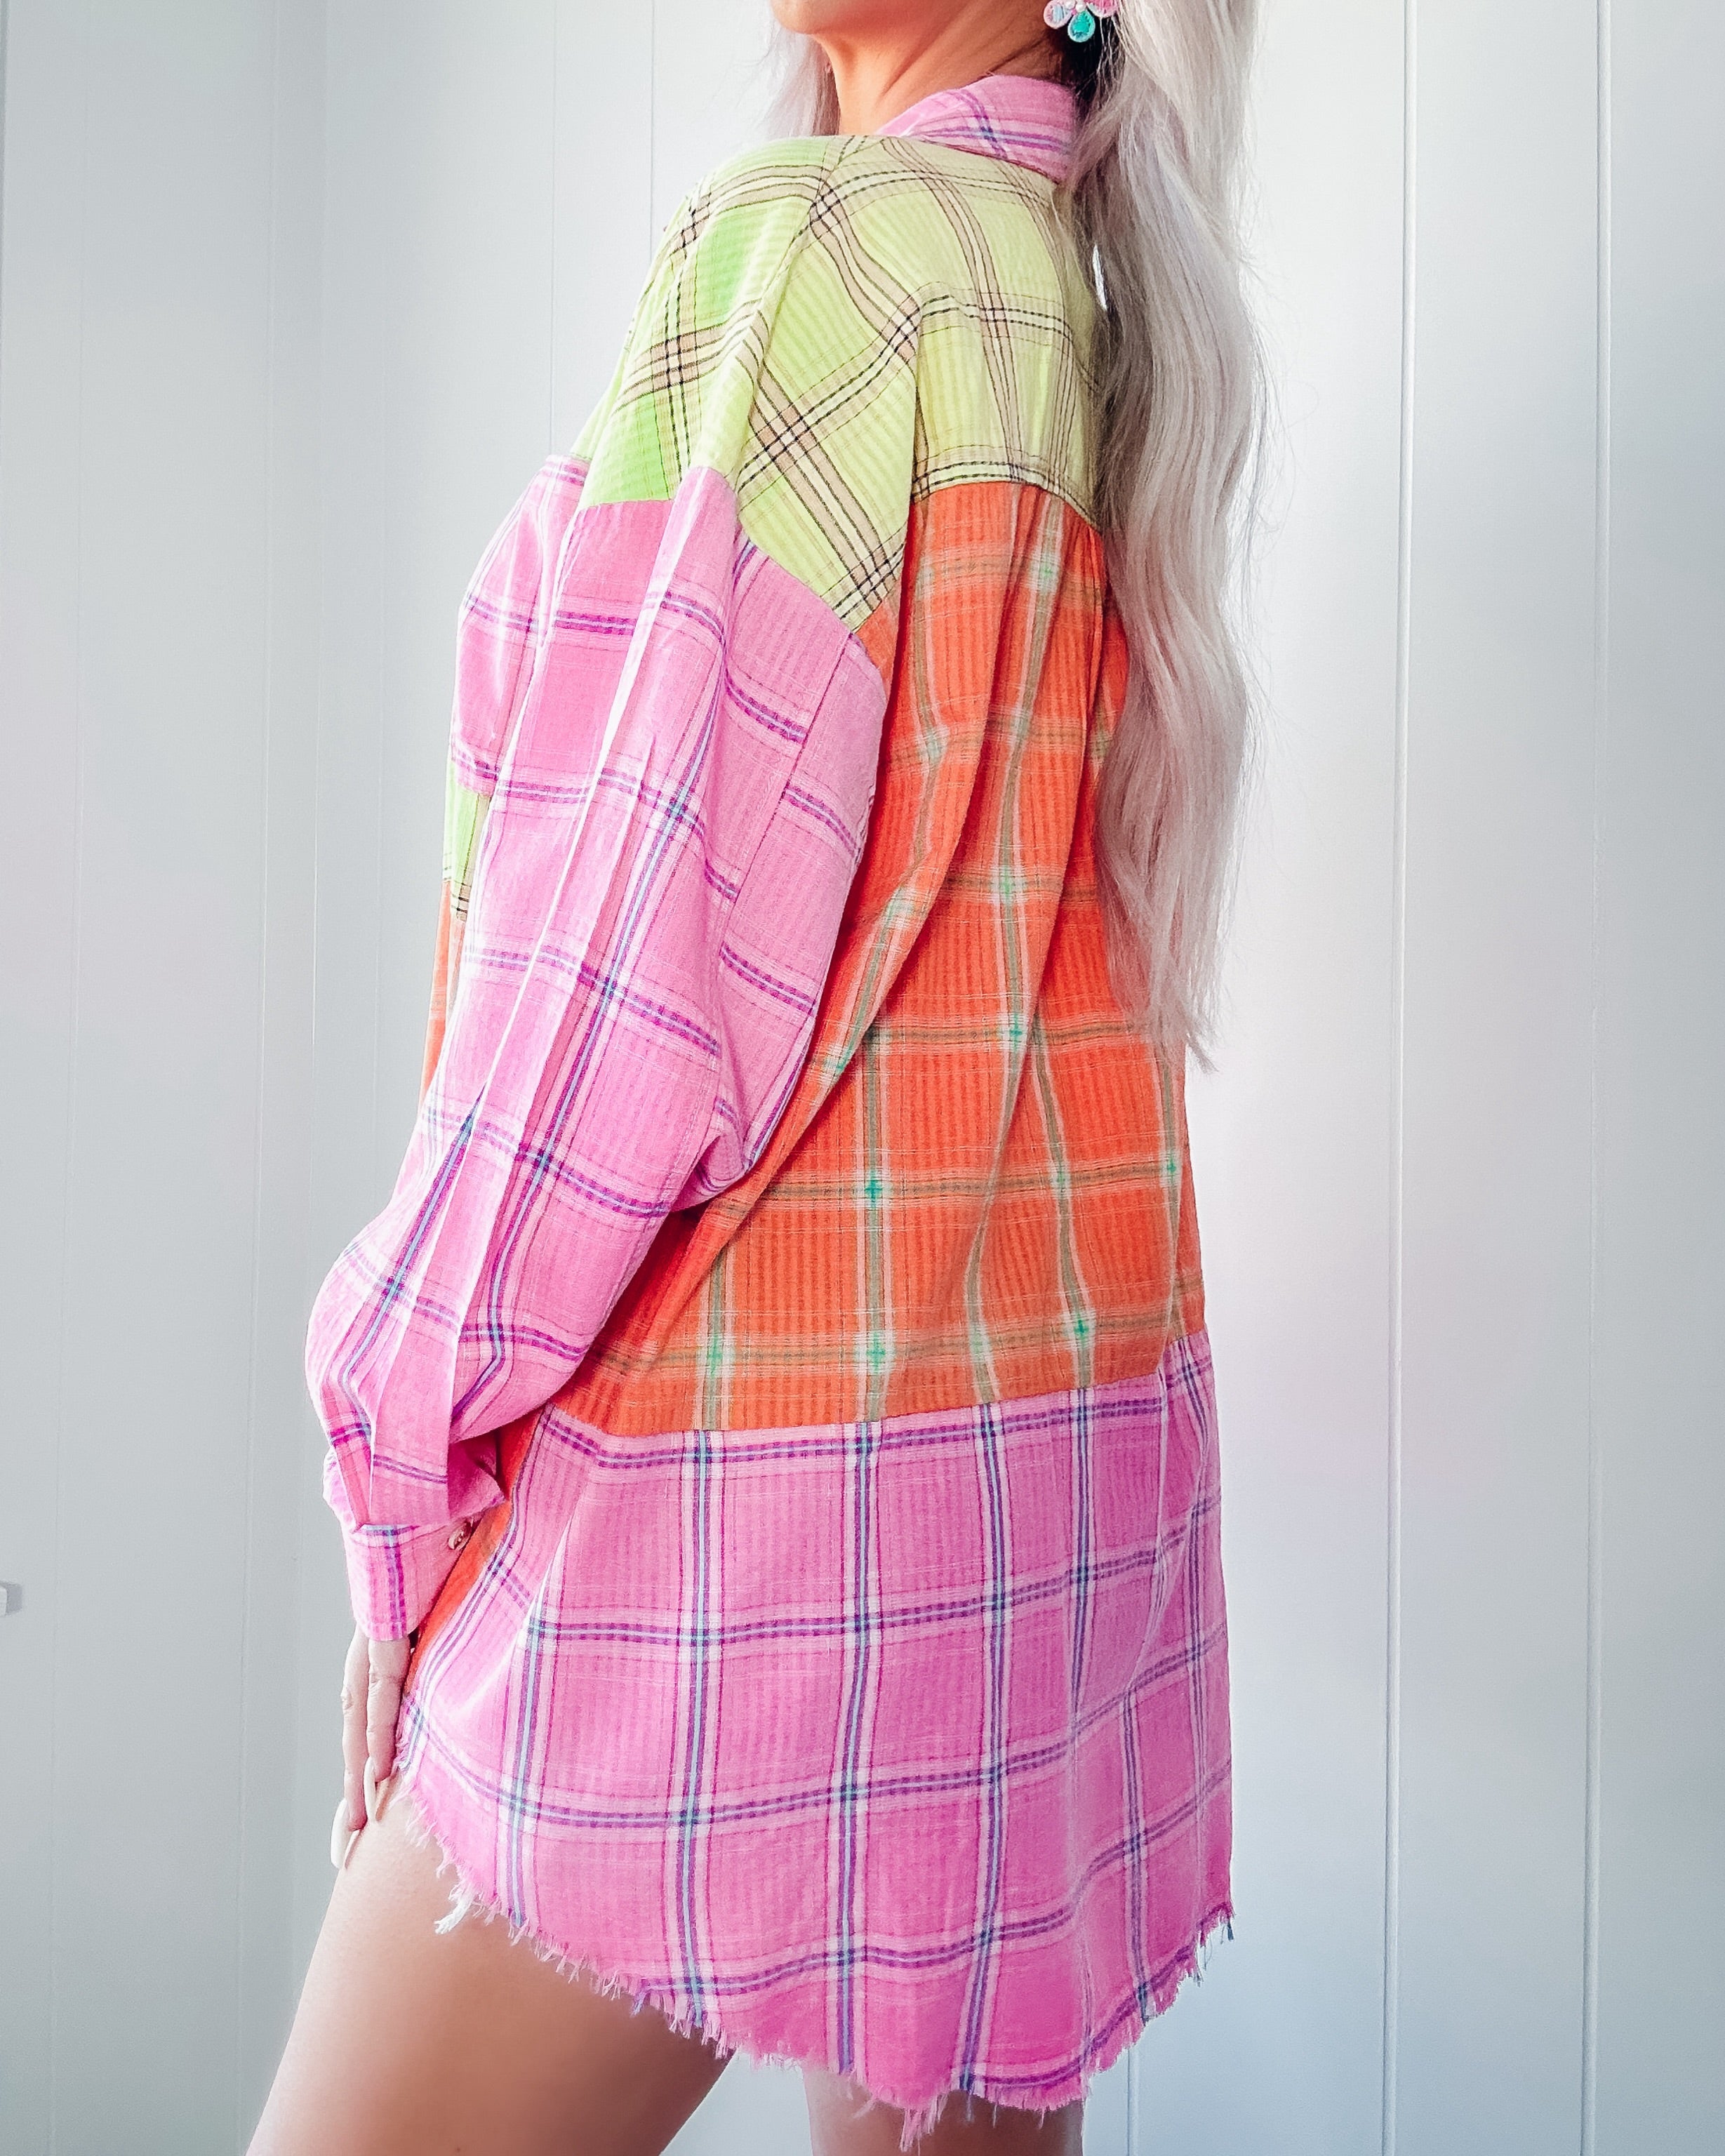 Meadow Bloom Bleach Washed Plaid Shirt - Pink/Lime